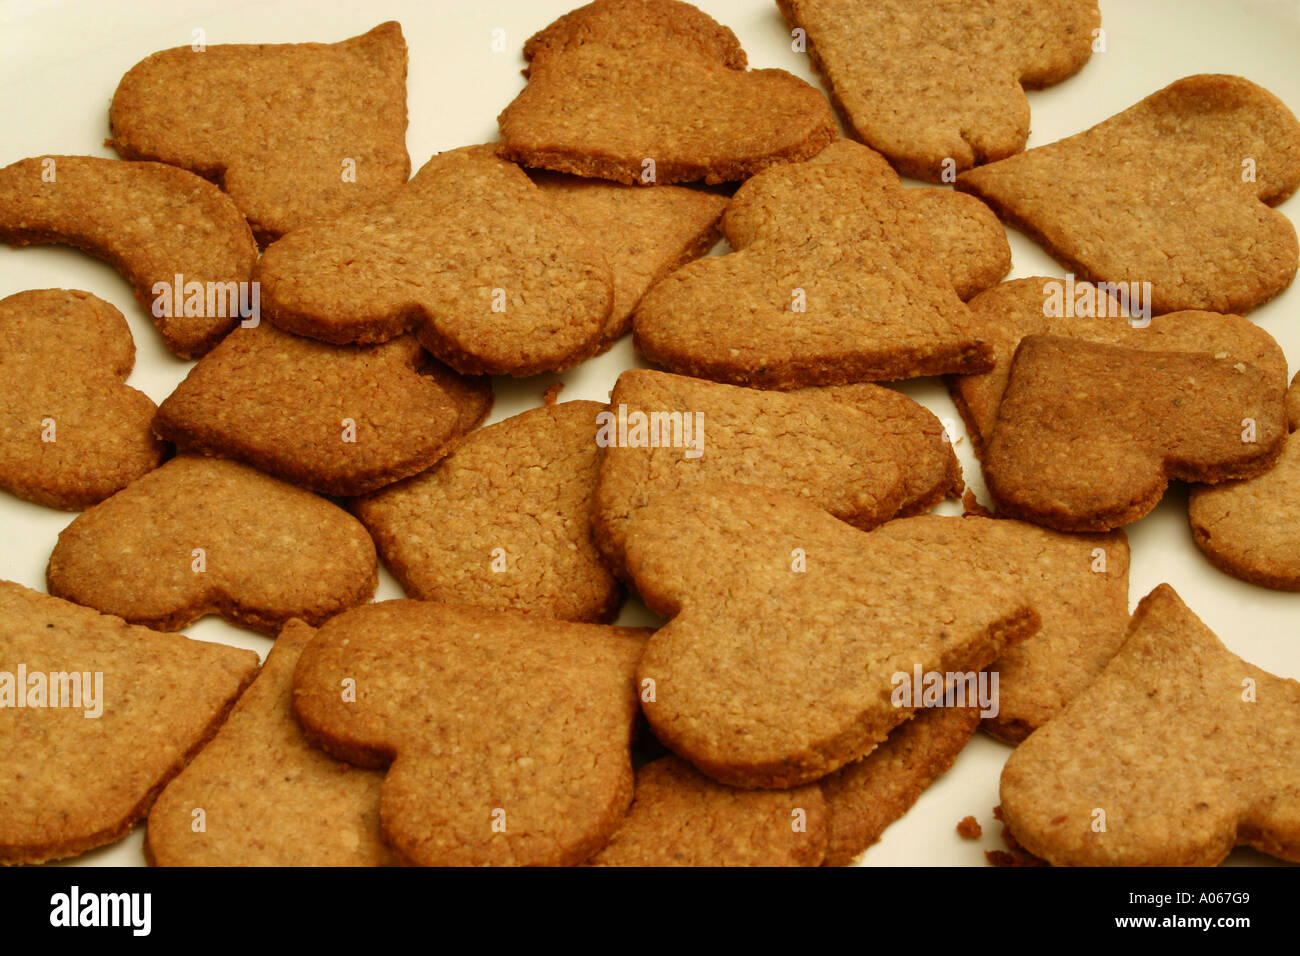 Heart shaped cookies are baked and kept at one place Stock Photo